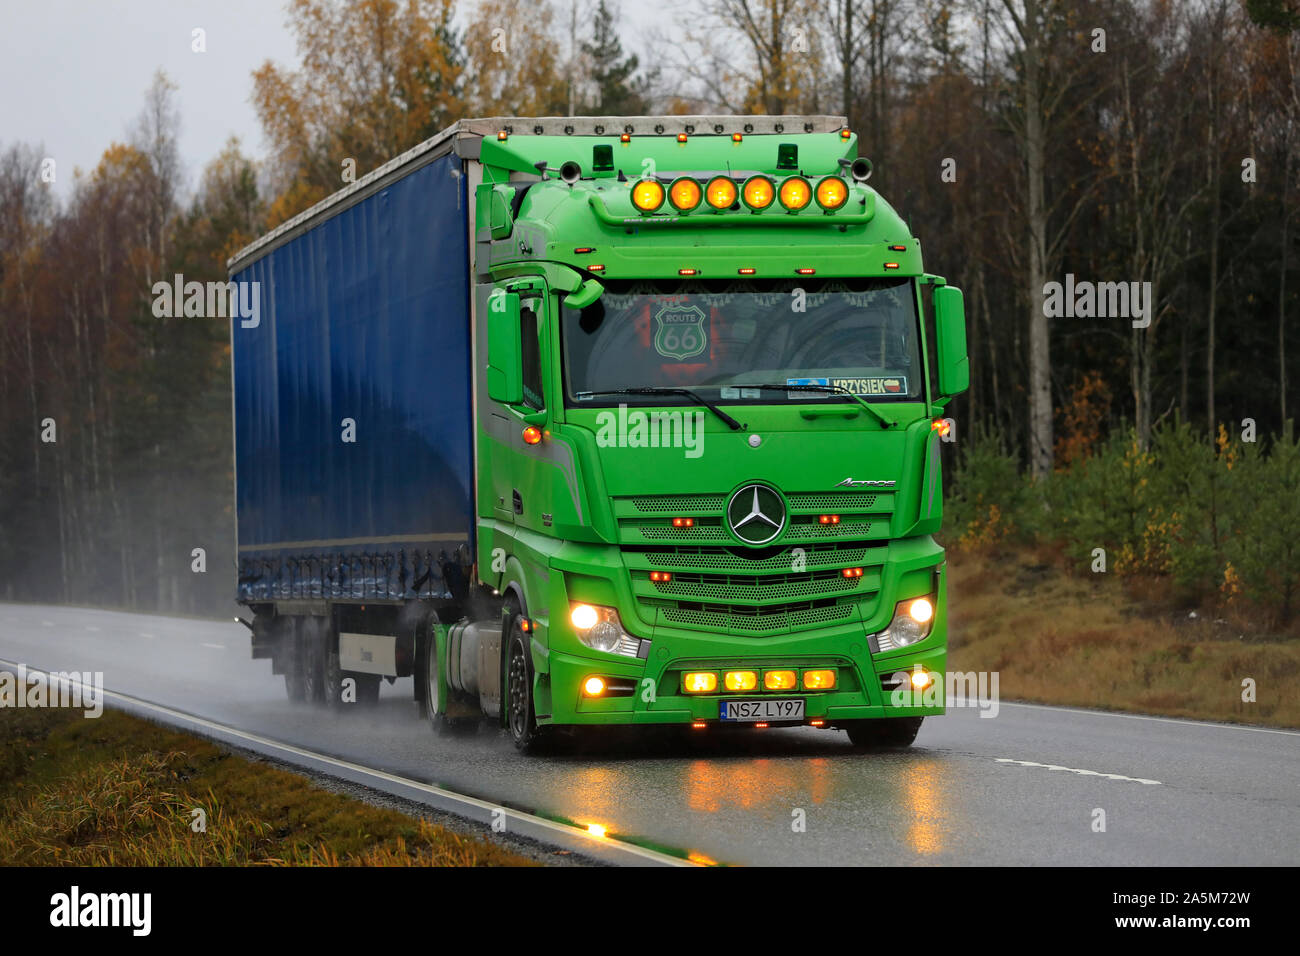 Lime green Mercedes-Benz Actros freight truck from Poland with beautiful light accessories trucking in Tenhola, Finland. October 18, 2019 Photo - Alamy